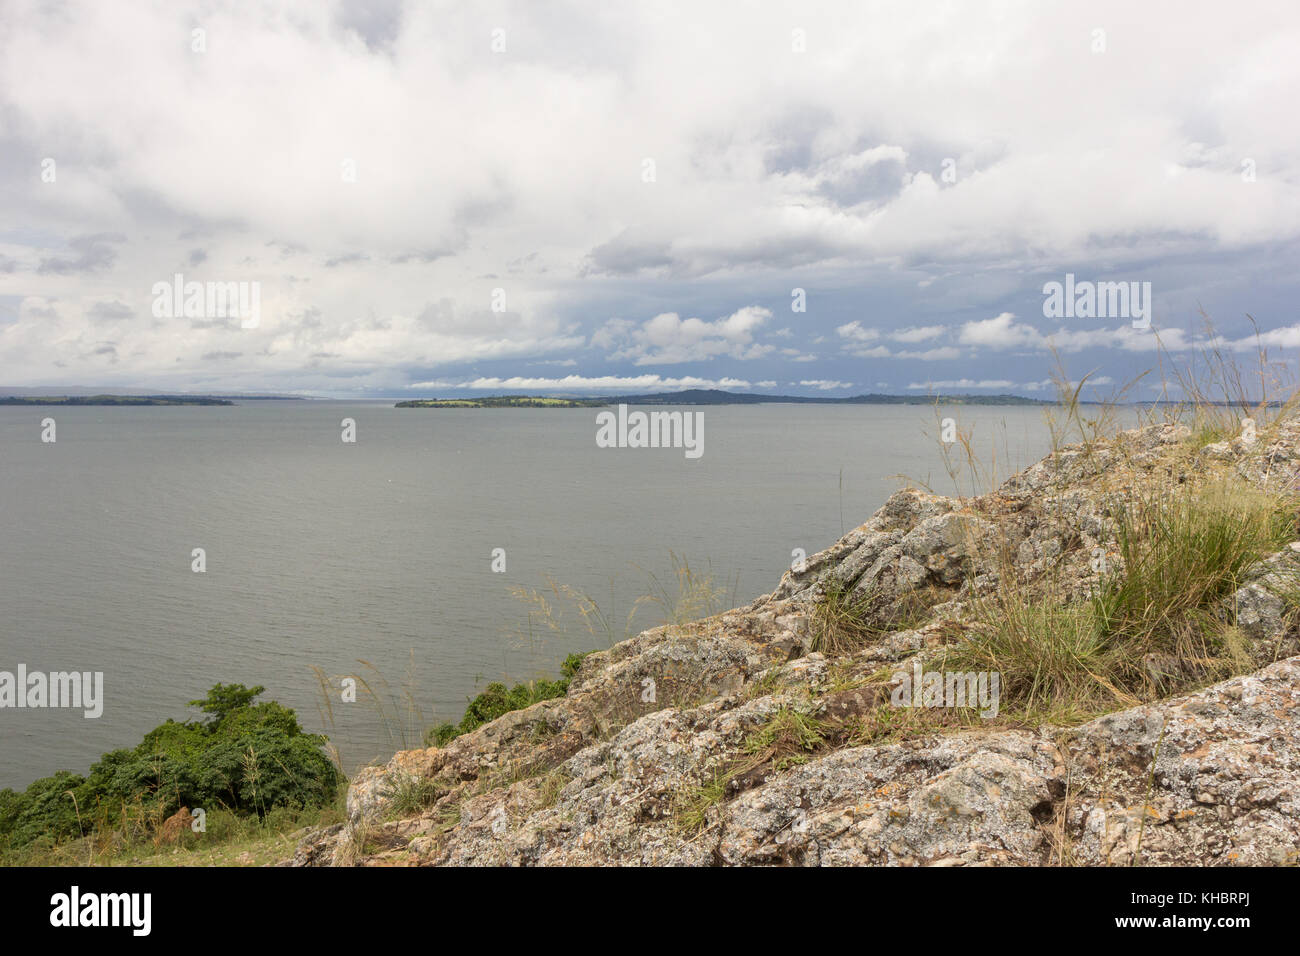 Lake Victoria visible from the little village of Busagazi in Uganda, Africa. Stock Photo